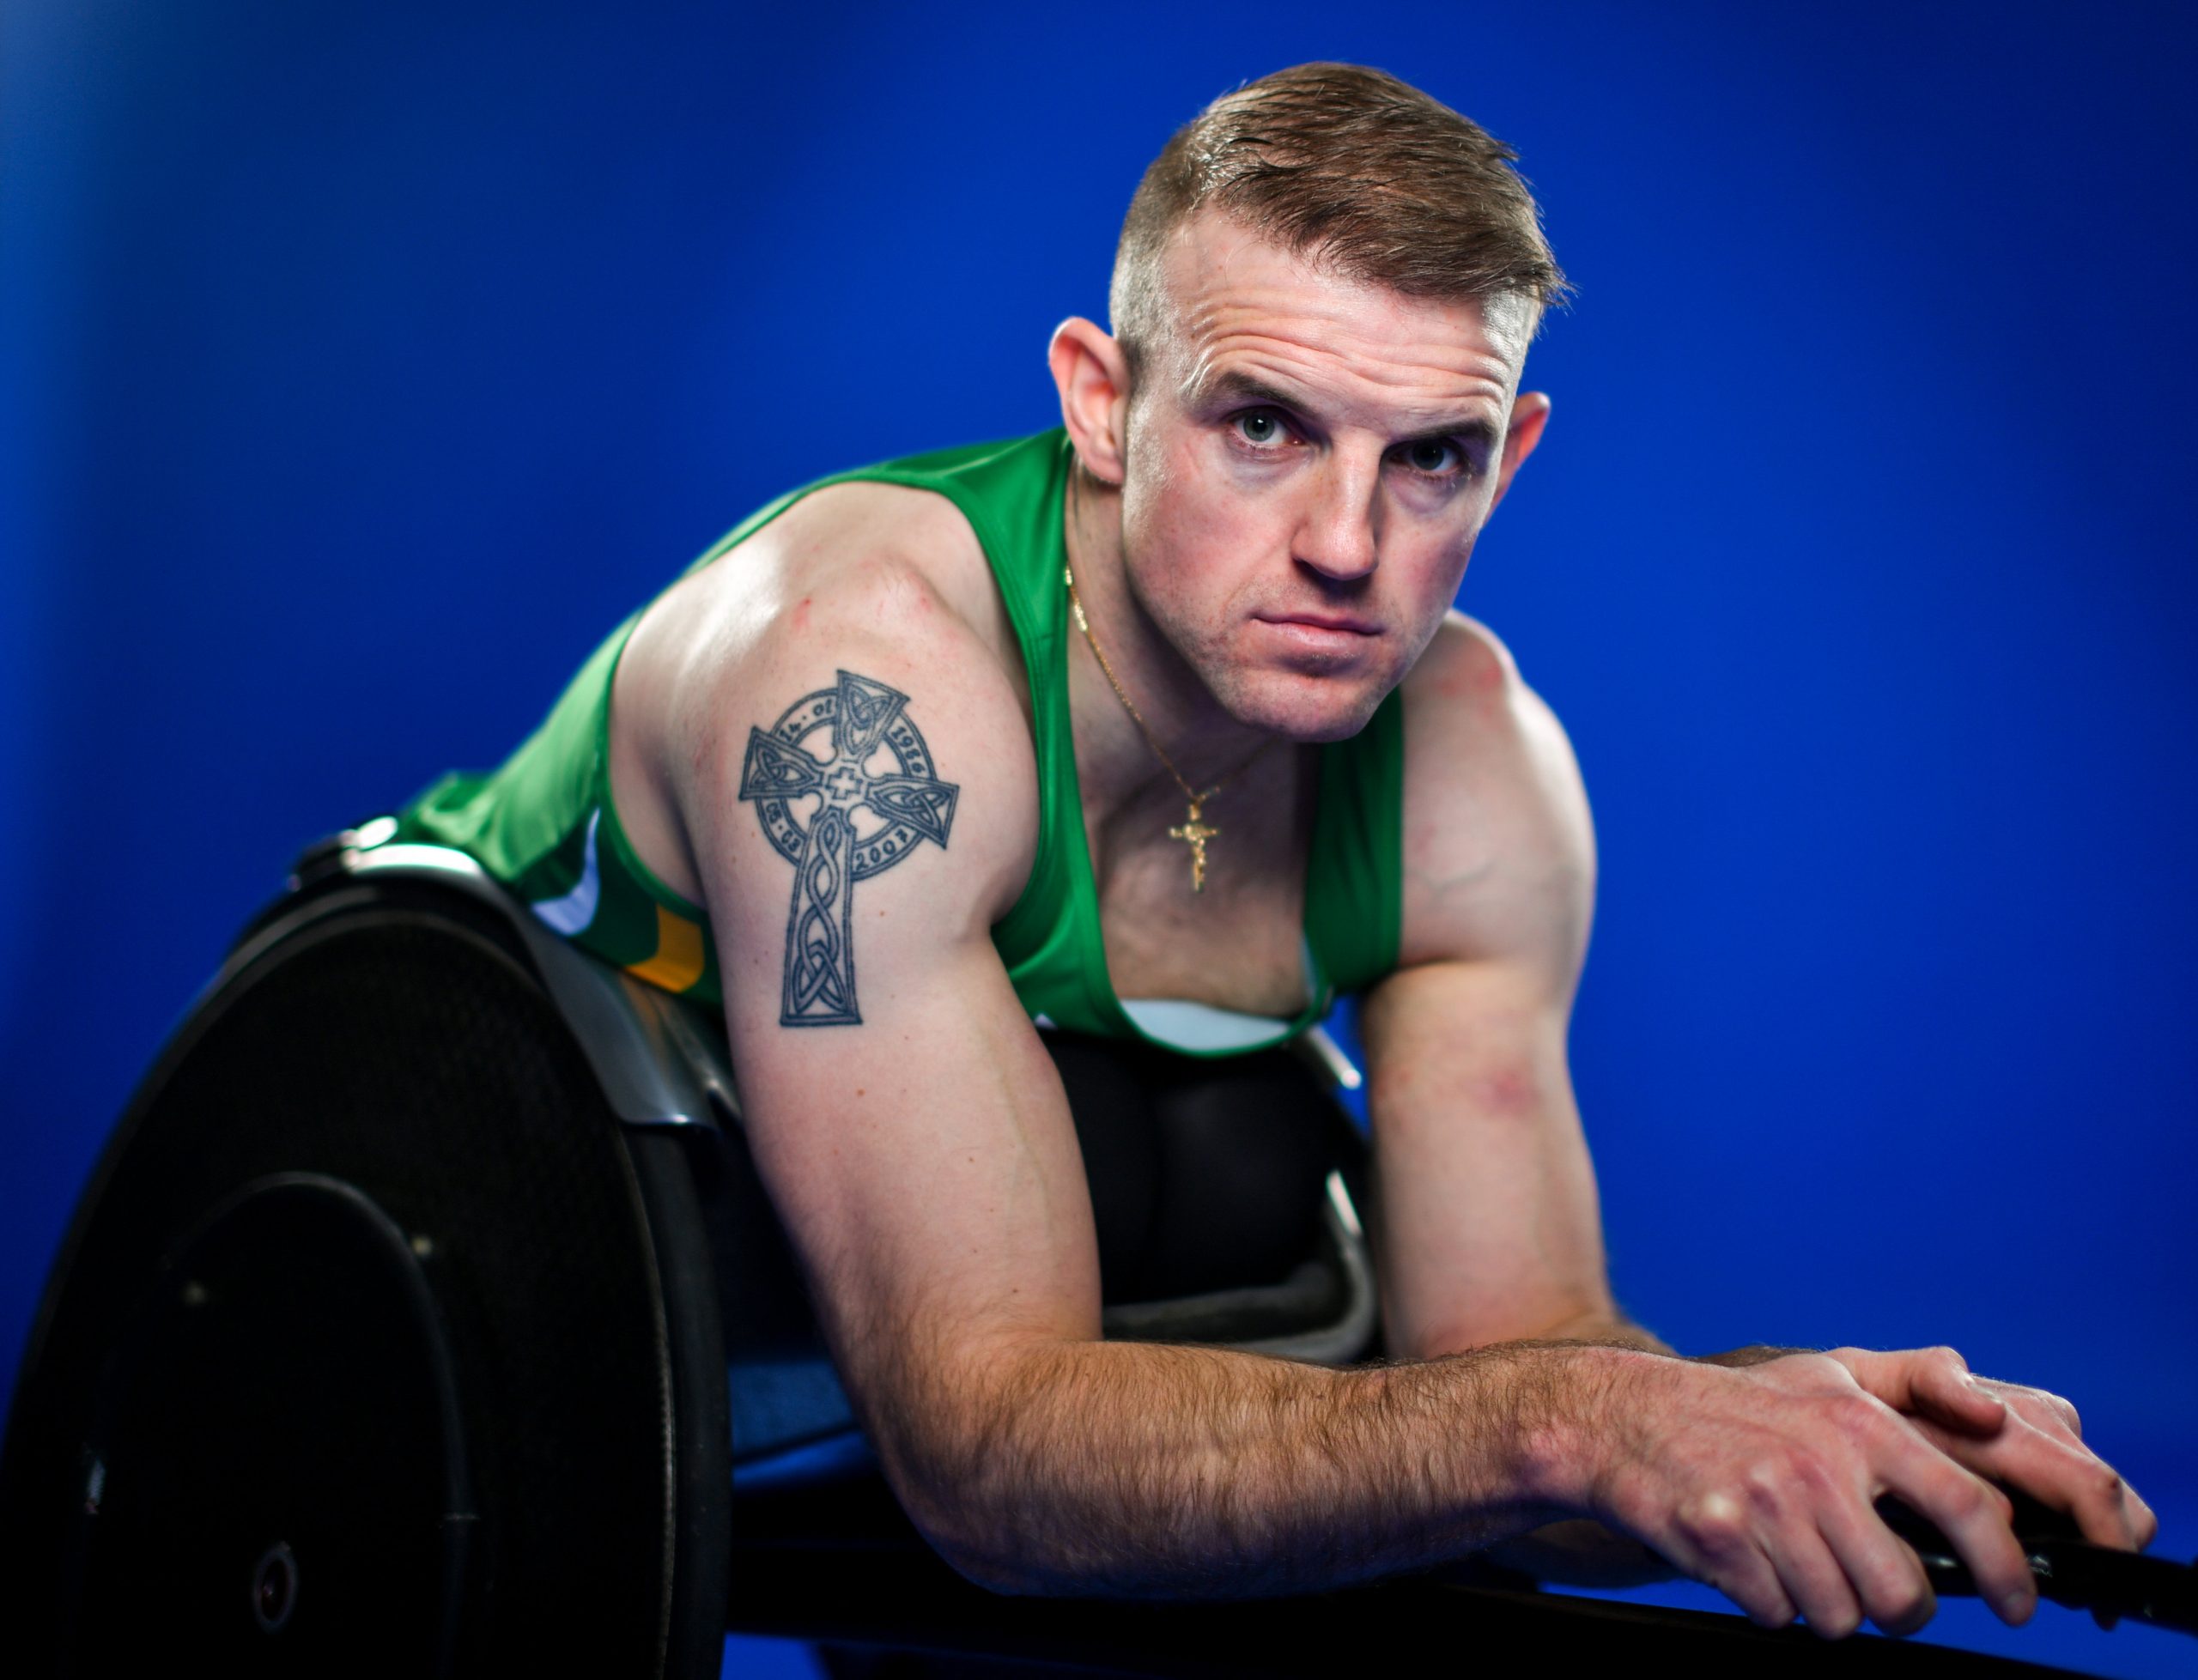 25 February 2020; Para Athlete Patrick Monahan joined the partners of Paralympics Ireland to mark the milestone of 6 Months To Go to the Tokyo 2020 Paralympic Games at the National Sports Campus, Abbotstown, Dublin. Photo by Harry Murphy/Sportsfile *** NO REPRODUCTION FEE ***